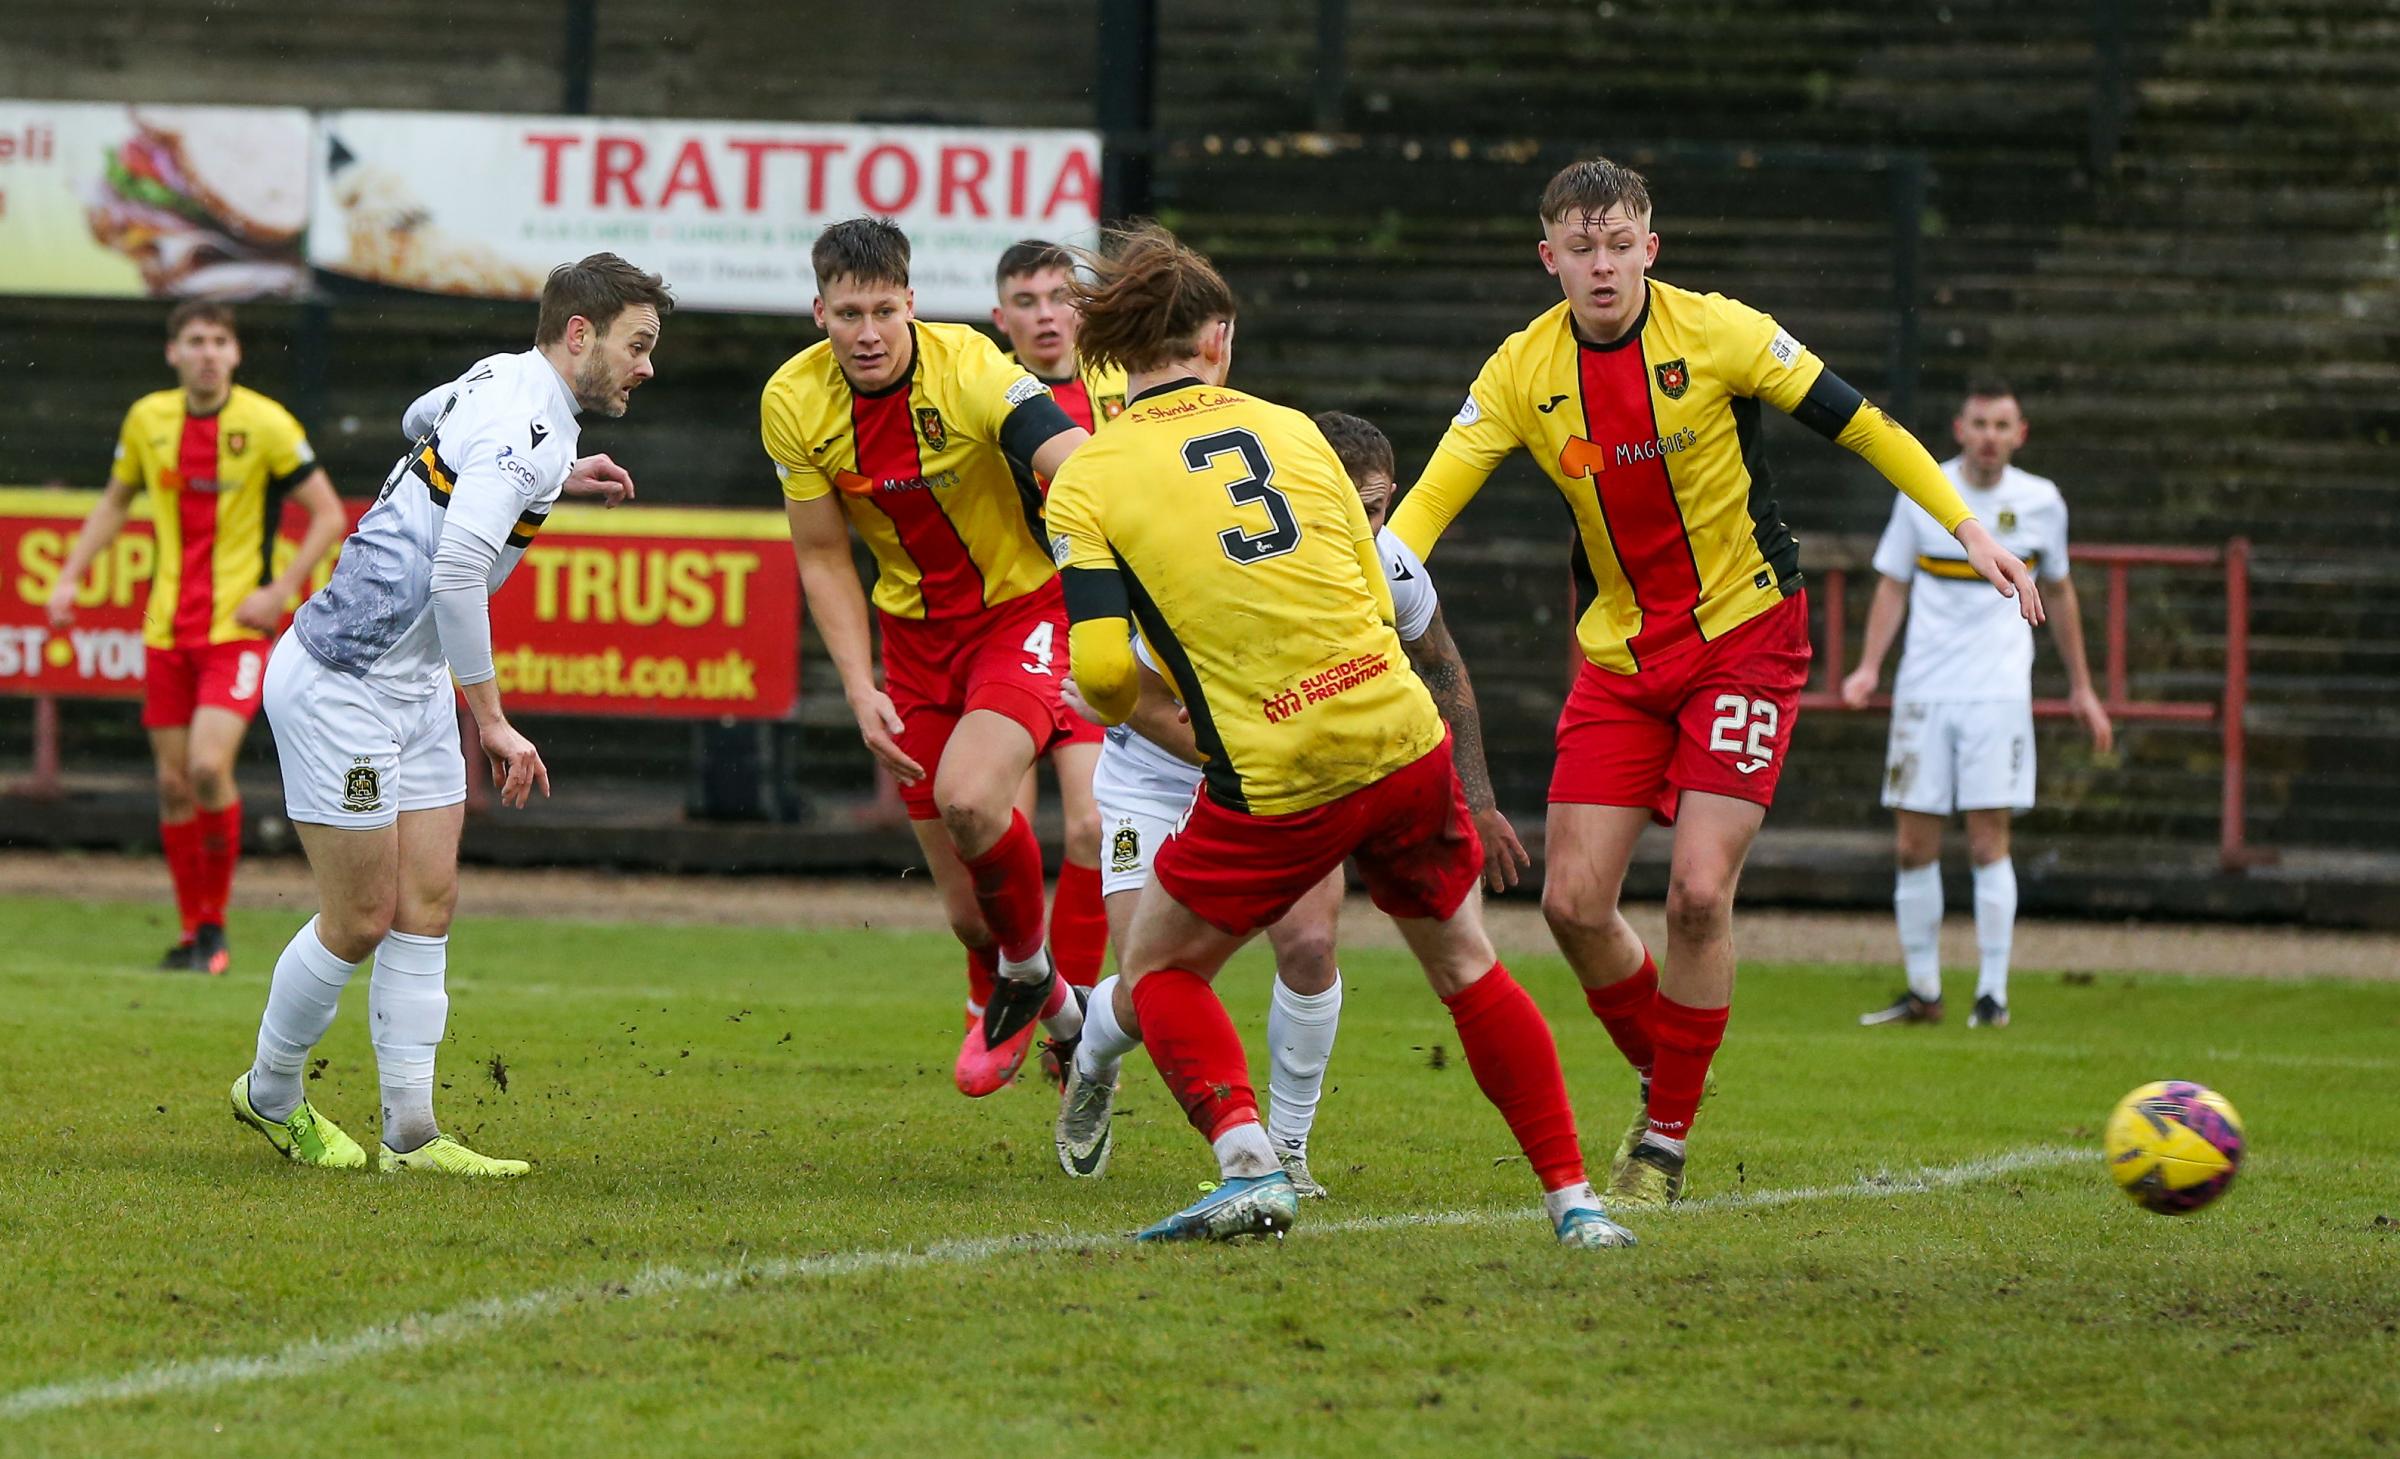 Dumbarton ended 2022 with a 1-0 win over Albion Rovers at Cliftonhill on Saturday (Photo - Andy Scott)